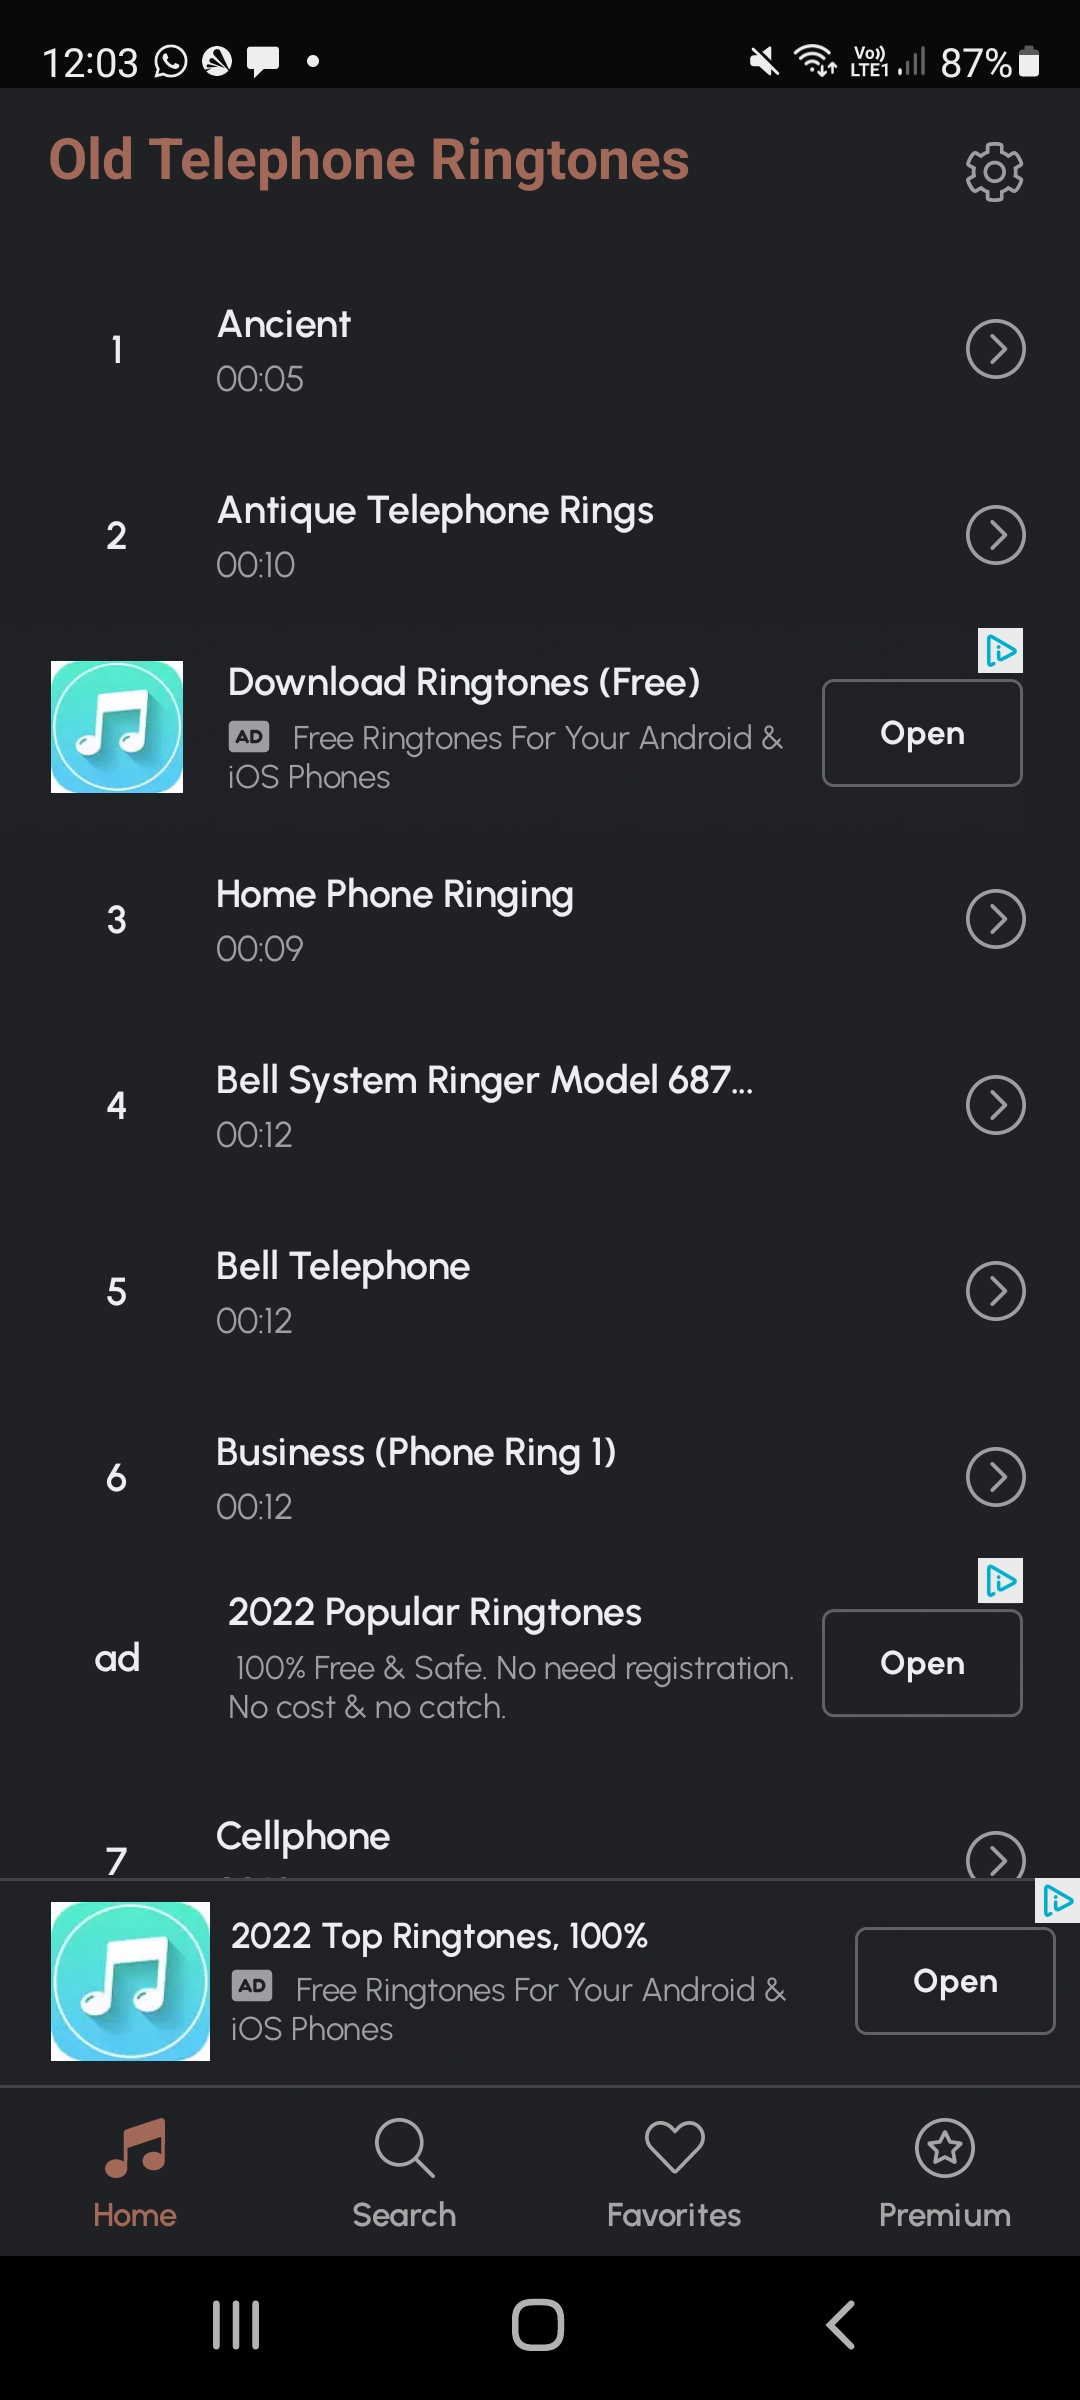 How to Find Free Ringtones for iPhone and Android